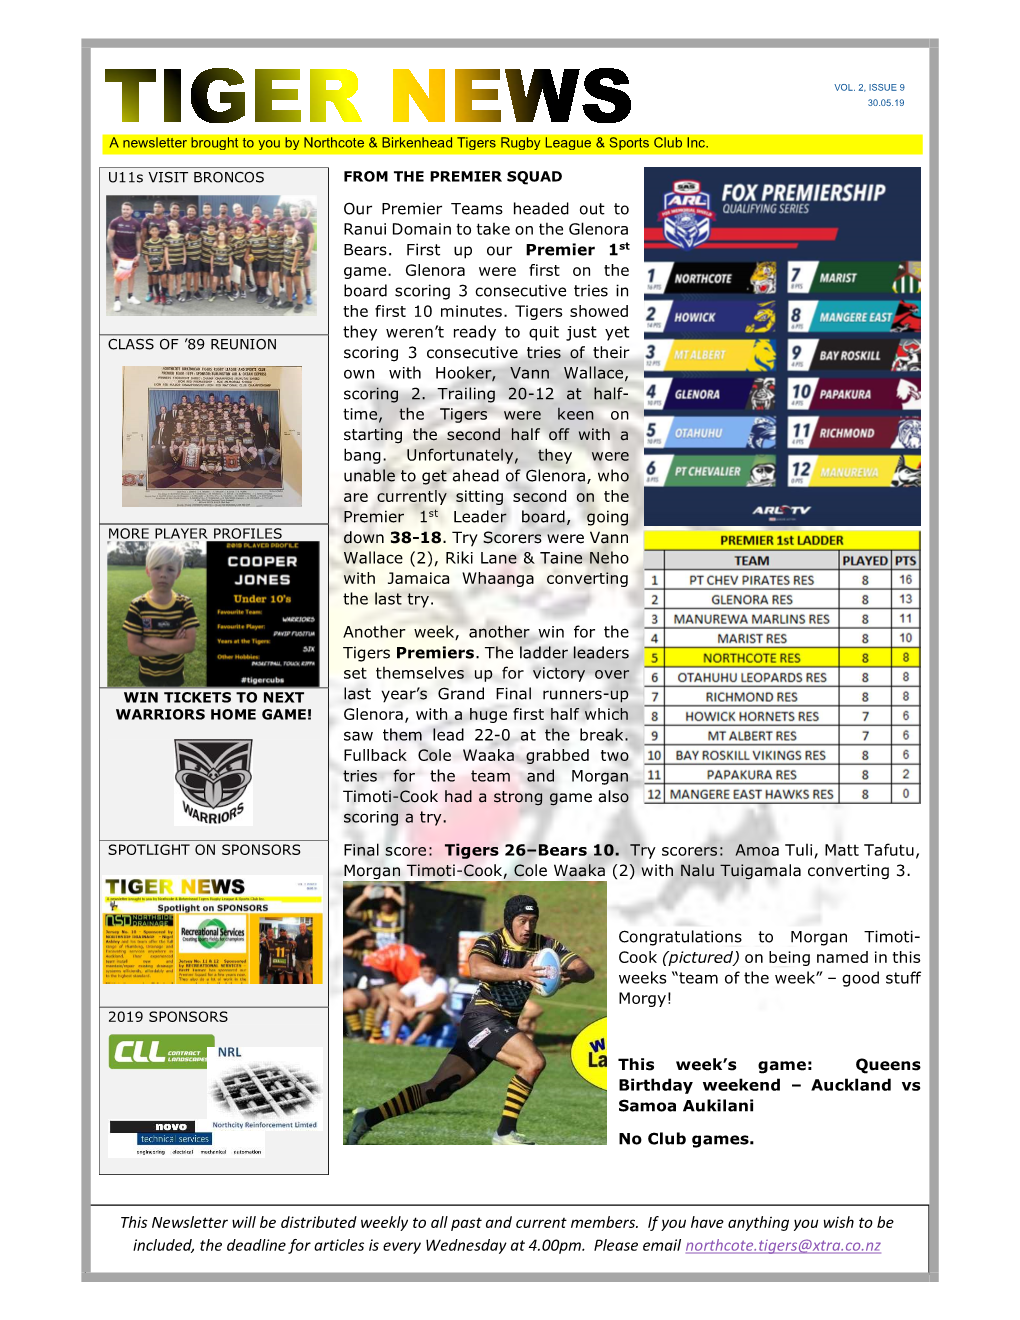 This Newsletter Will Be Distributed Weekly to All Past and Current Members